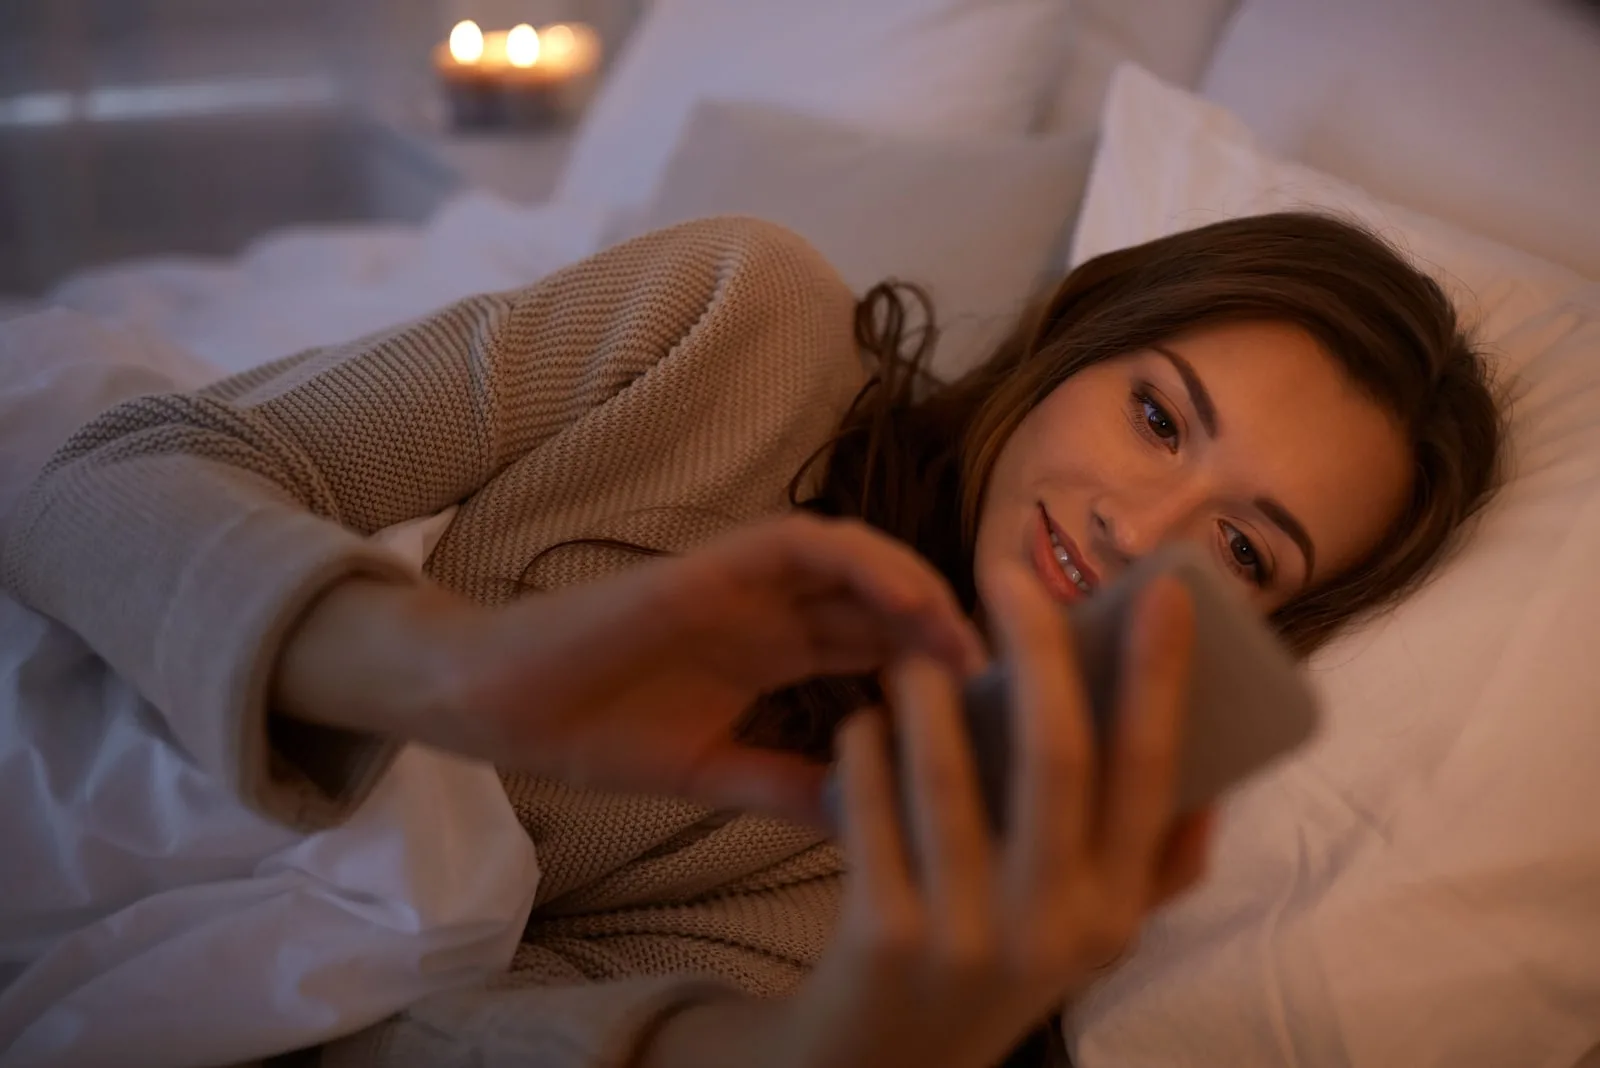 a smiling woman lies in bed and uses a smartphone